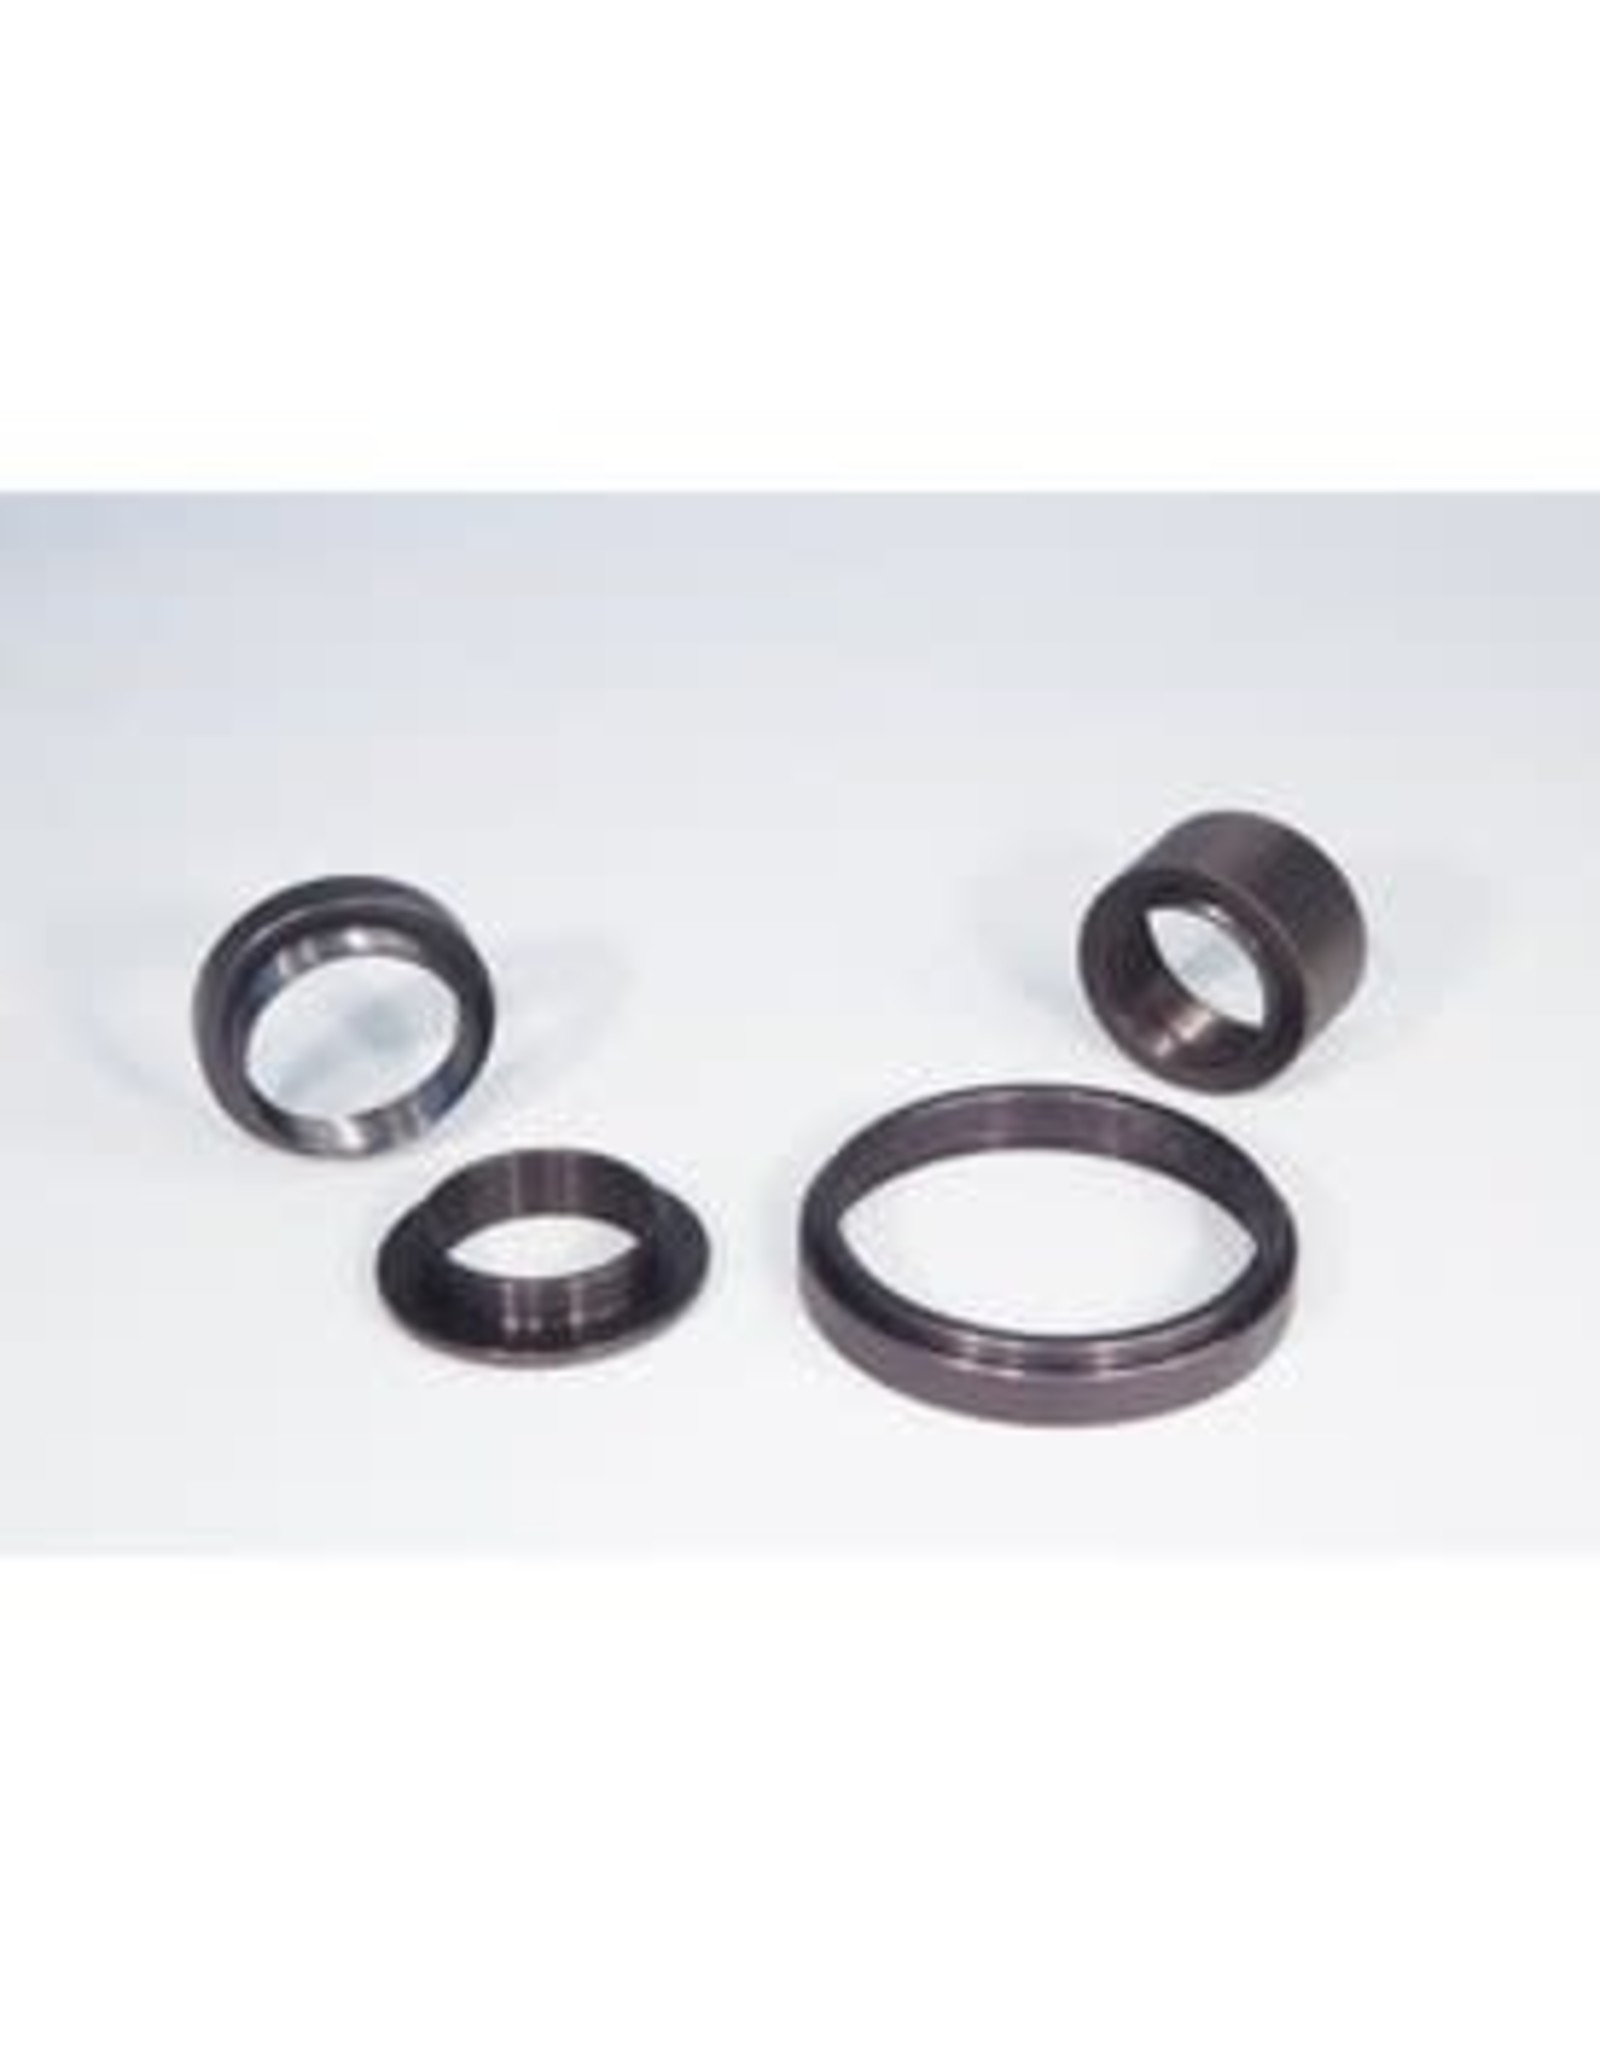 Takahashi Takahashi TCD0025 25mm Spacer for FS-60C Reducer